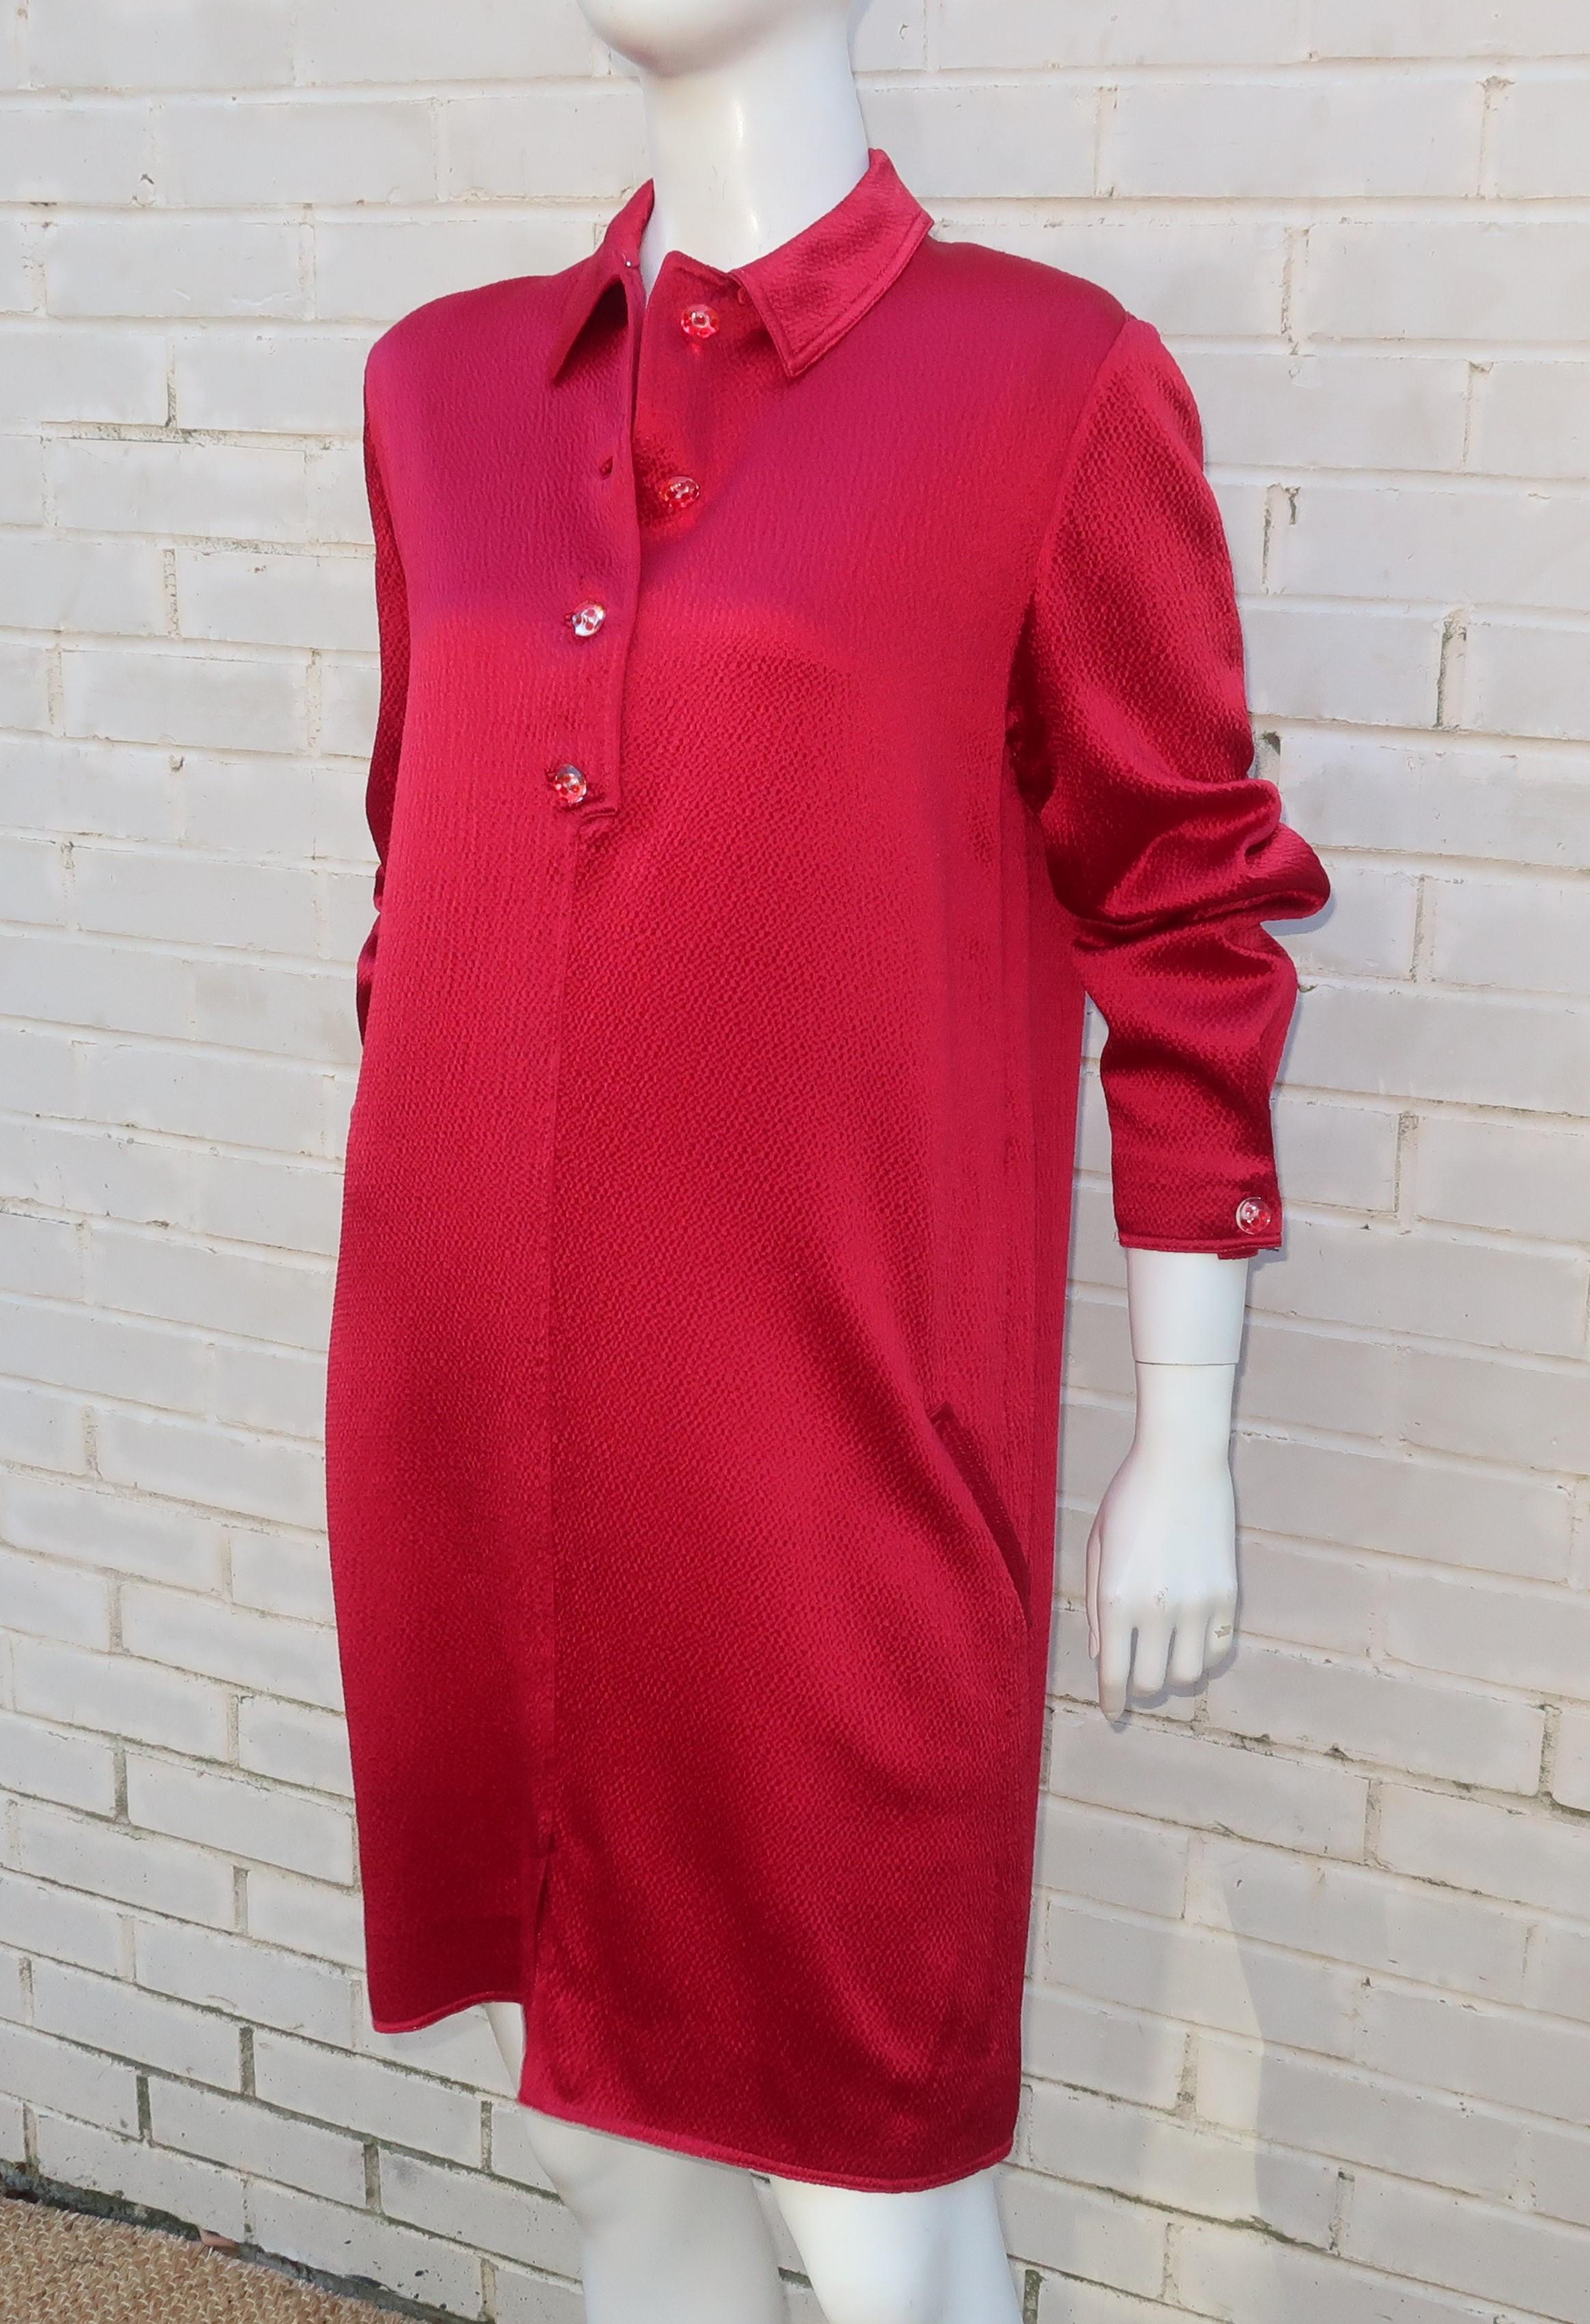 Geoffrey Beene's simple shirt dress design is elevated by a sumptuous textured satin ruby red fabric with metallic threading.  The red dotted lucite buttons add to the glam details which also includes top stitching at the back yoke and a unique cuff